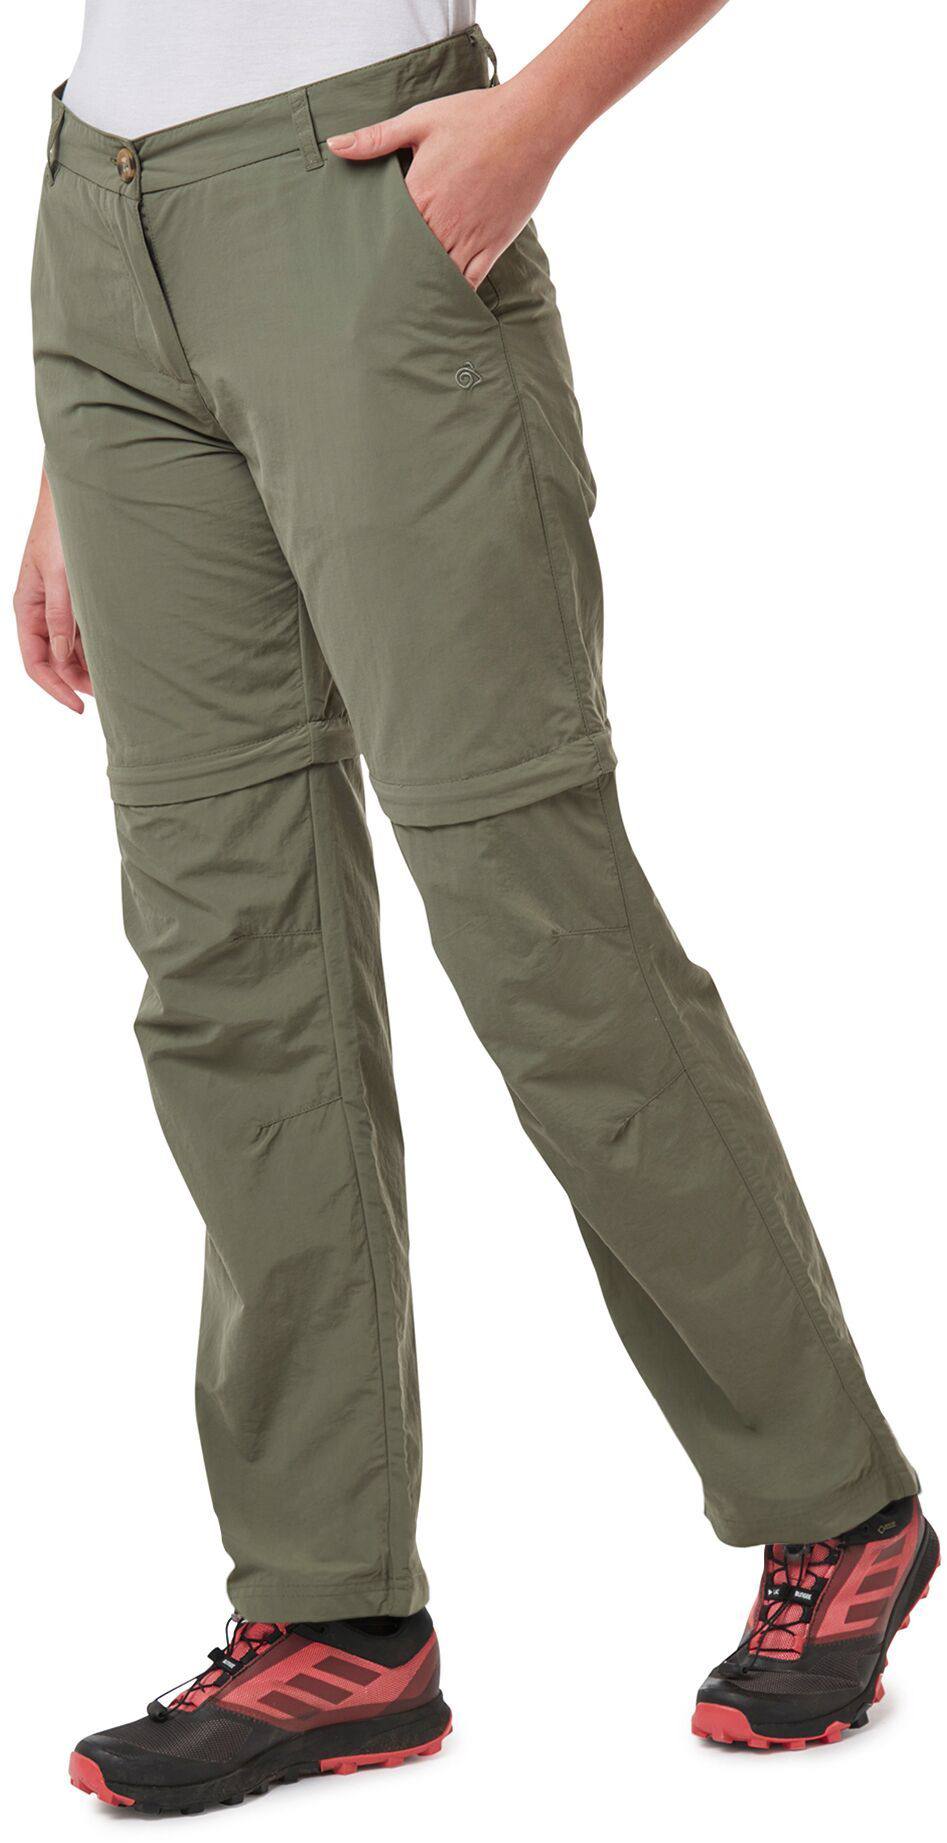 Craghoppers Women's Nosilife Convertible Long Trousers